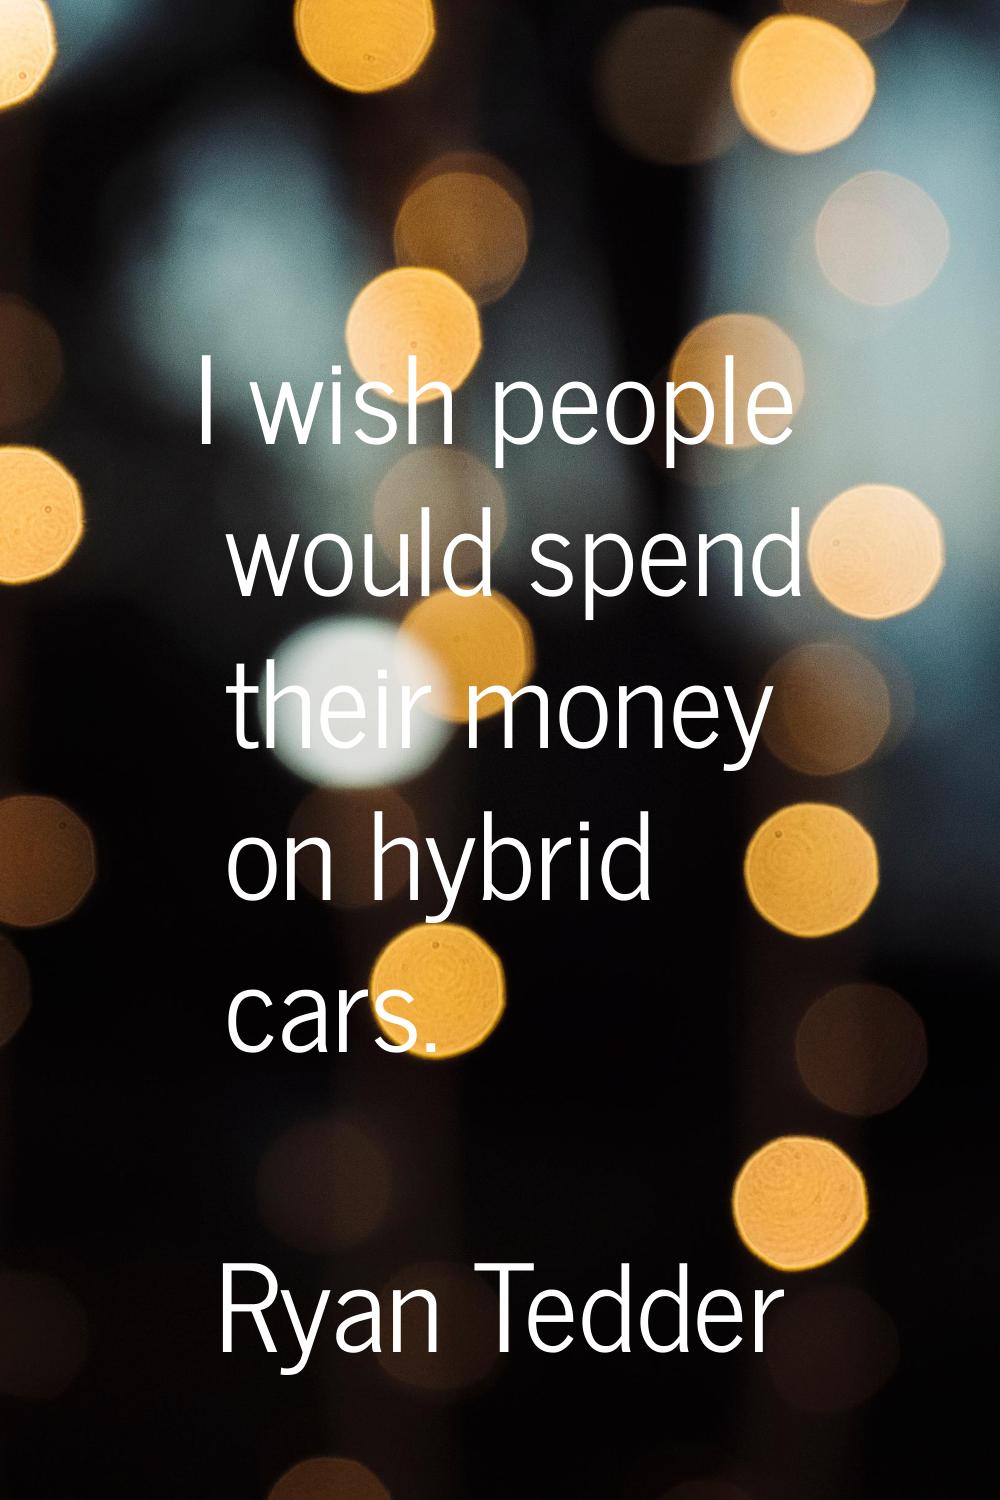 I wish people would spend their money on hybrid cars.